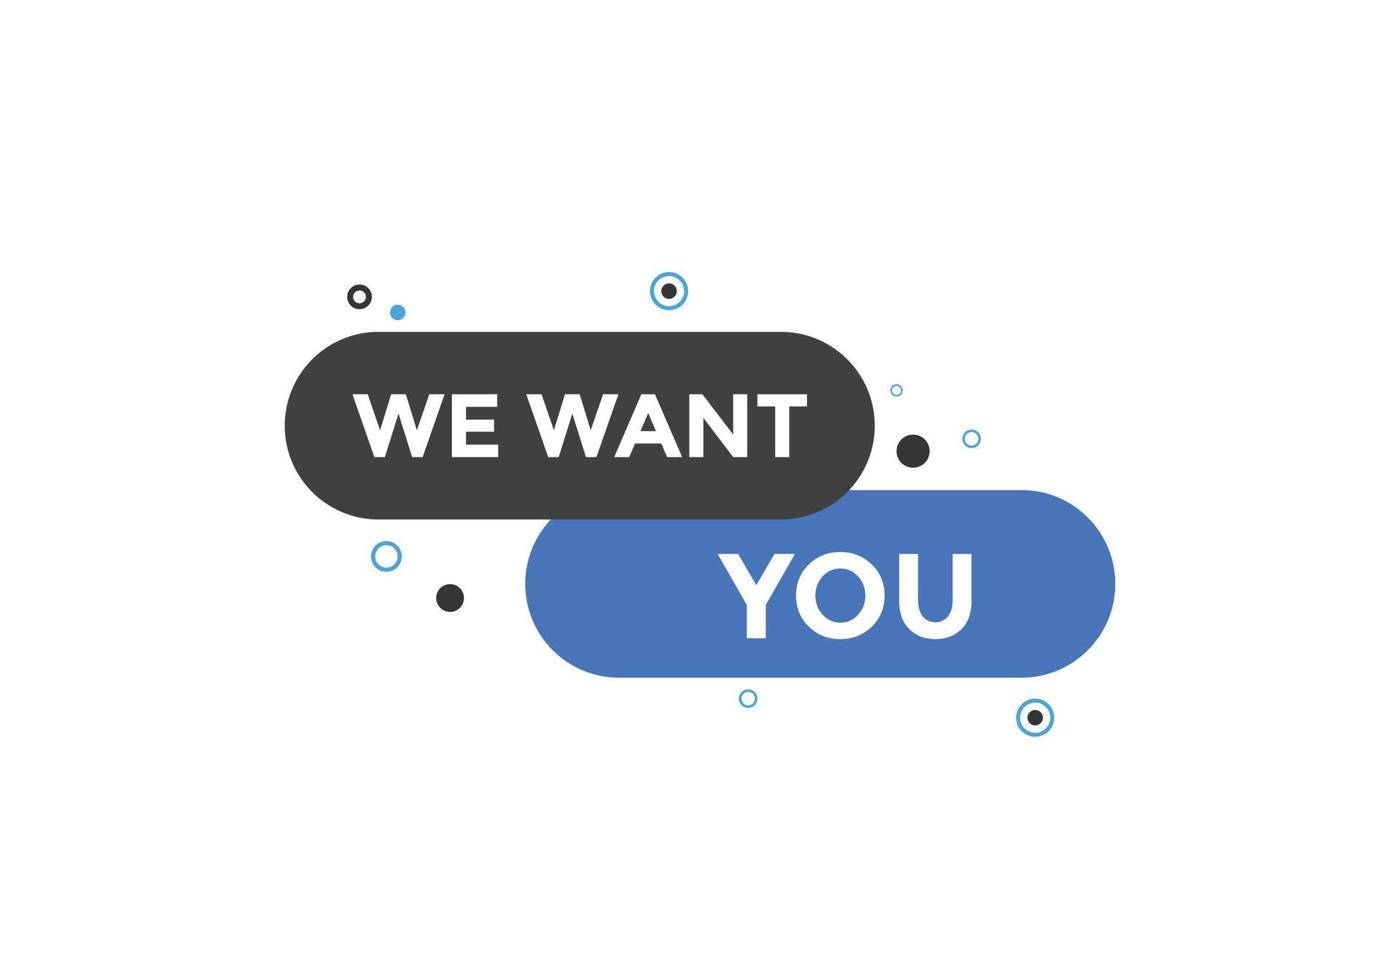 We want you button. speech bubble. We want you web banner template. Vector Illustration